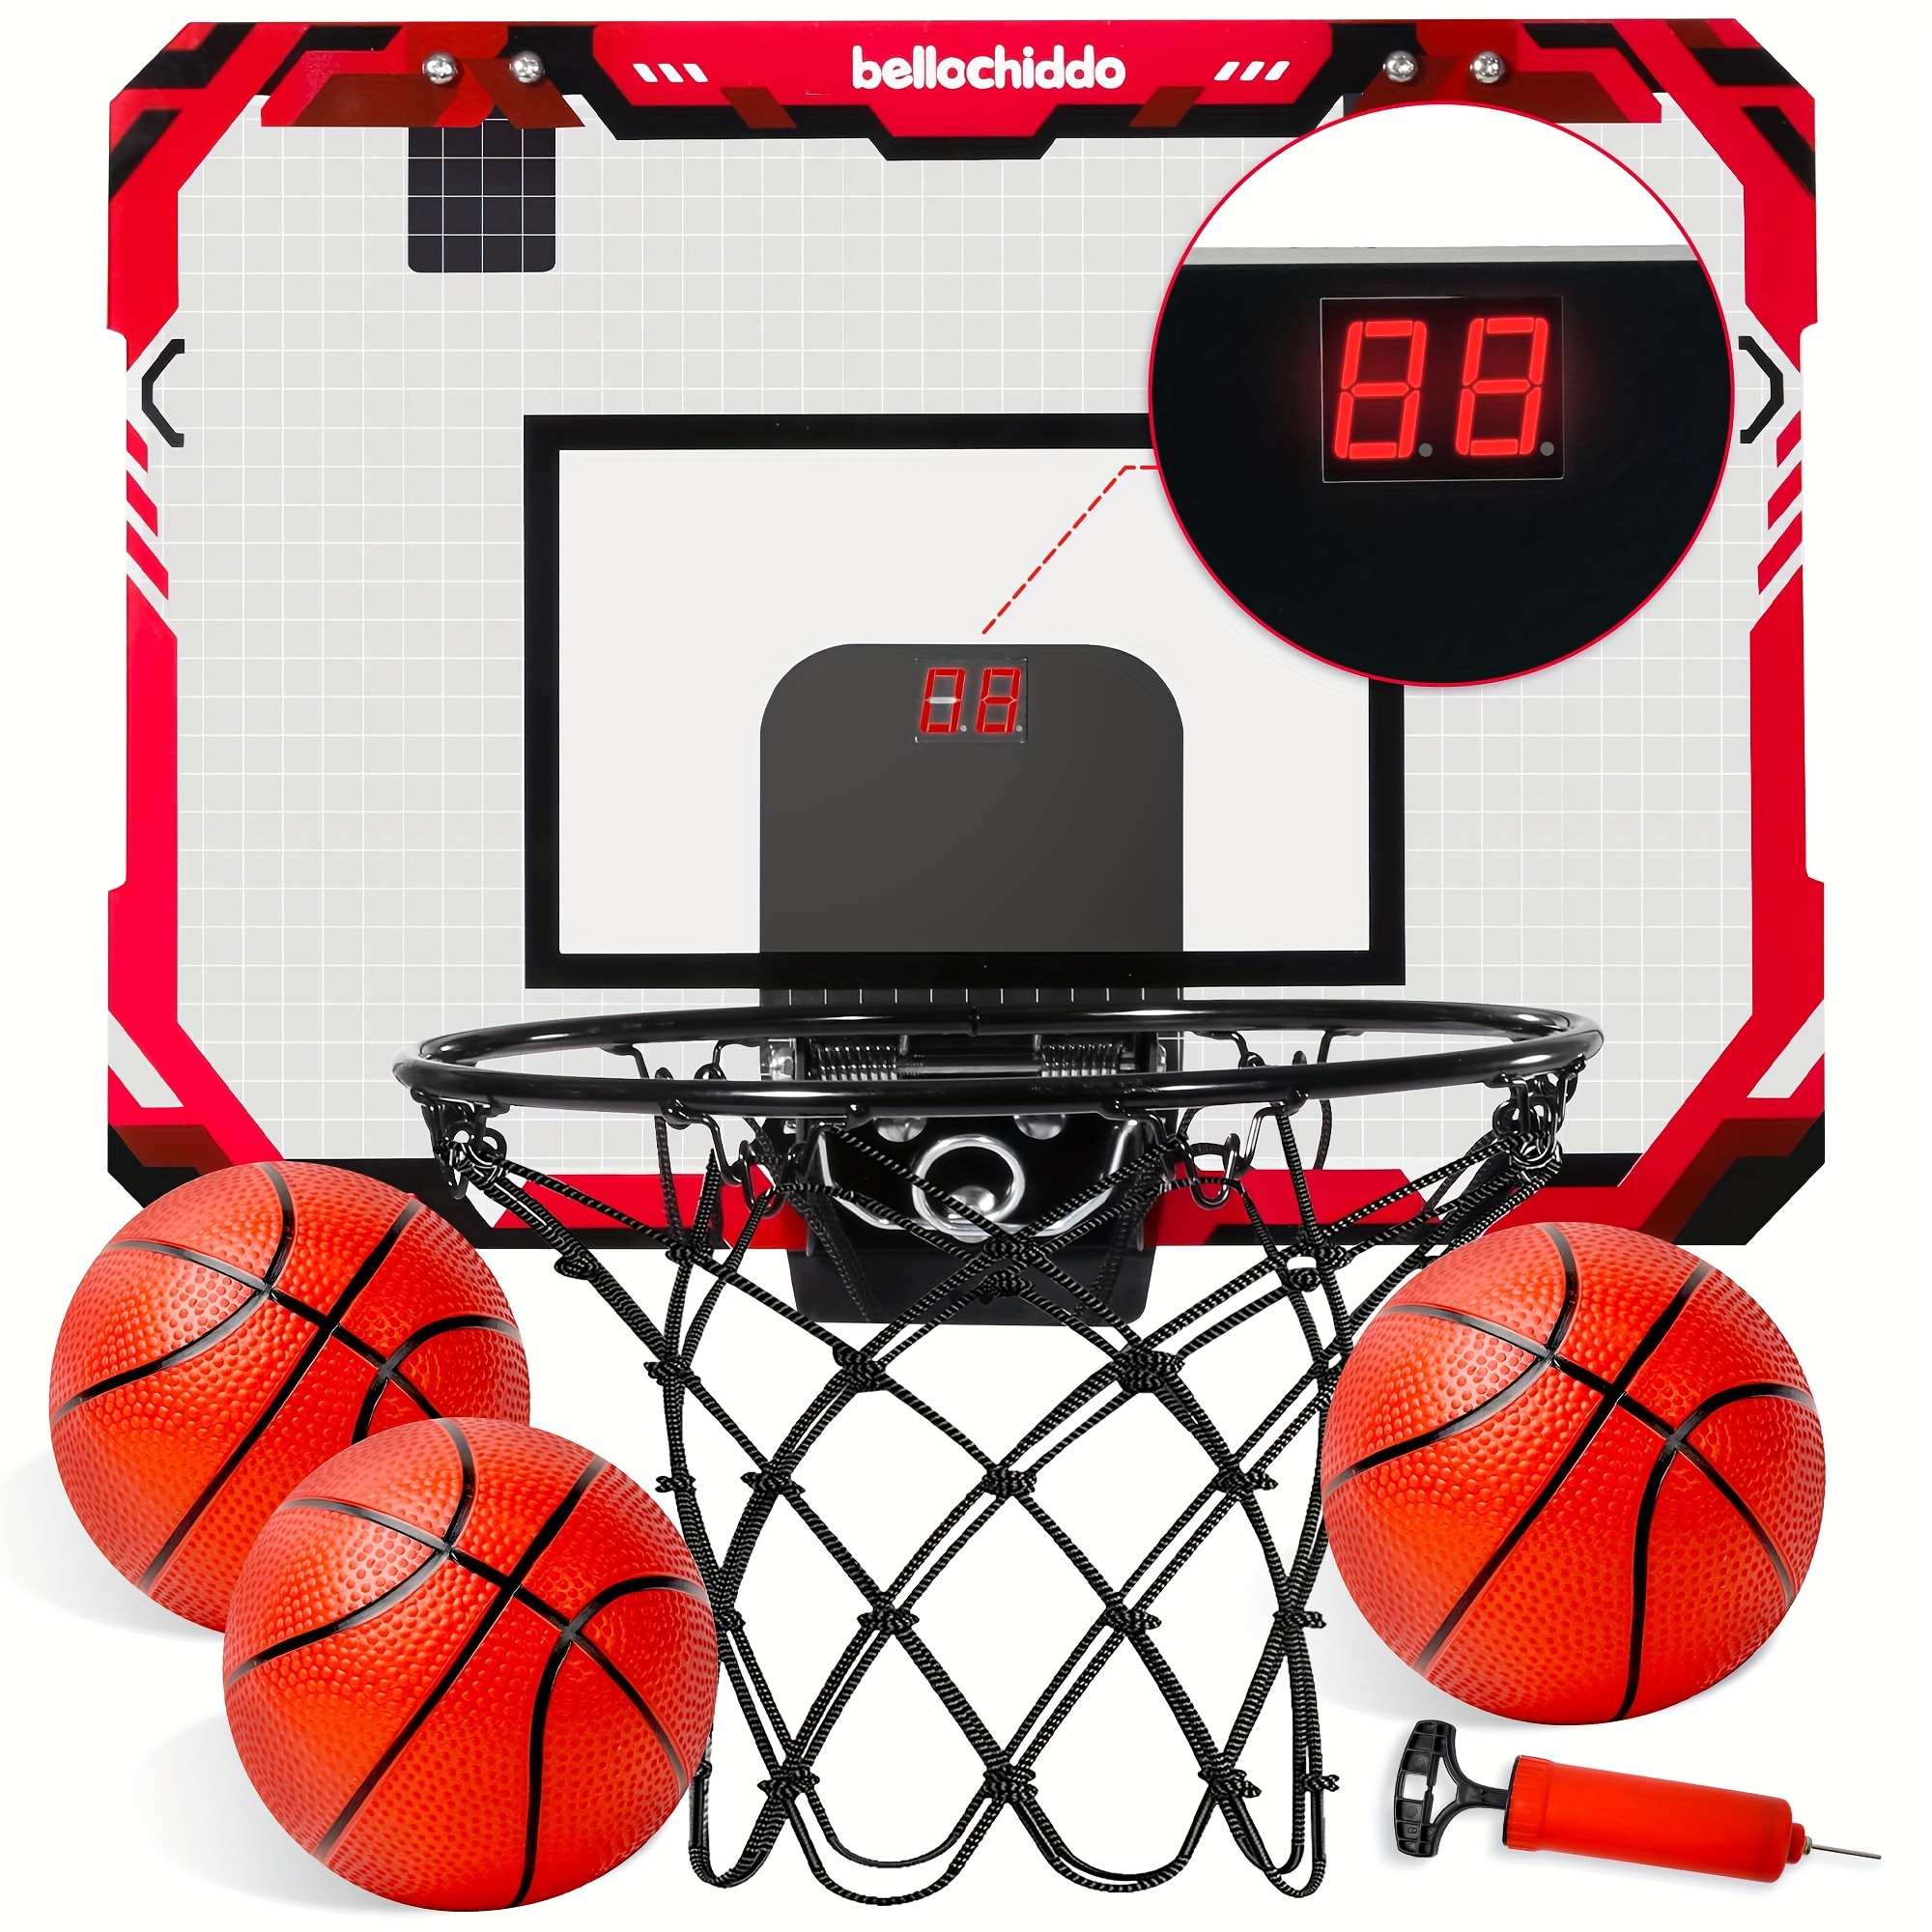 

Basketball Hoop Indoor For Kids And Adults - Mini Basketball Hoop With Electronic Scorerboard And 3 Balls, Over The Door Basketball Hoop Indoor For Wall Bedroom And Office